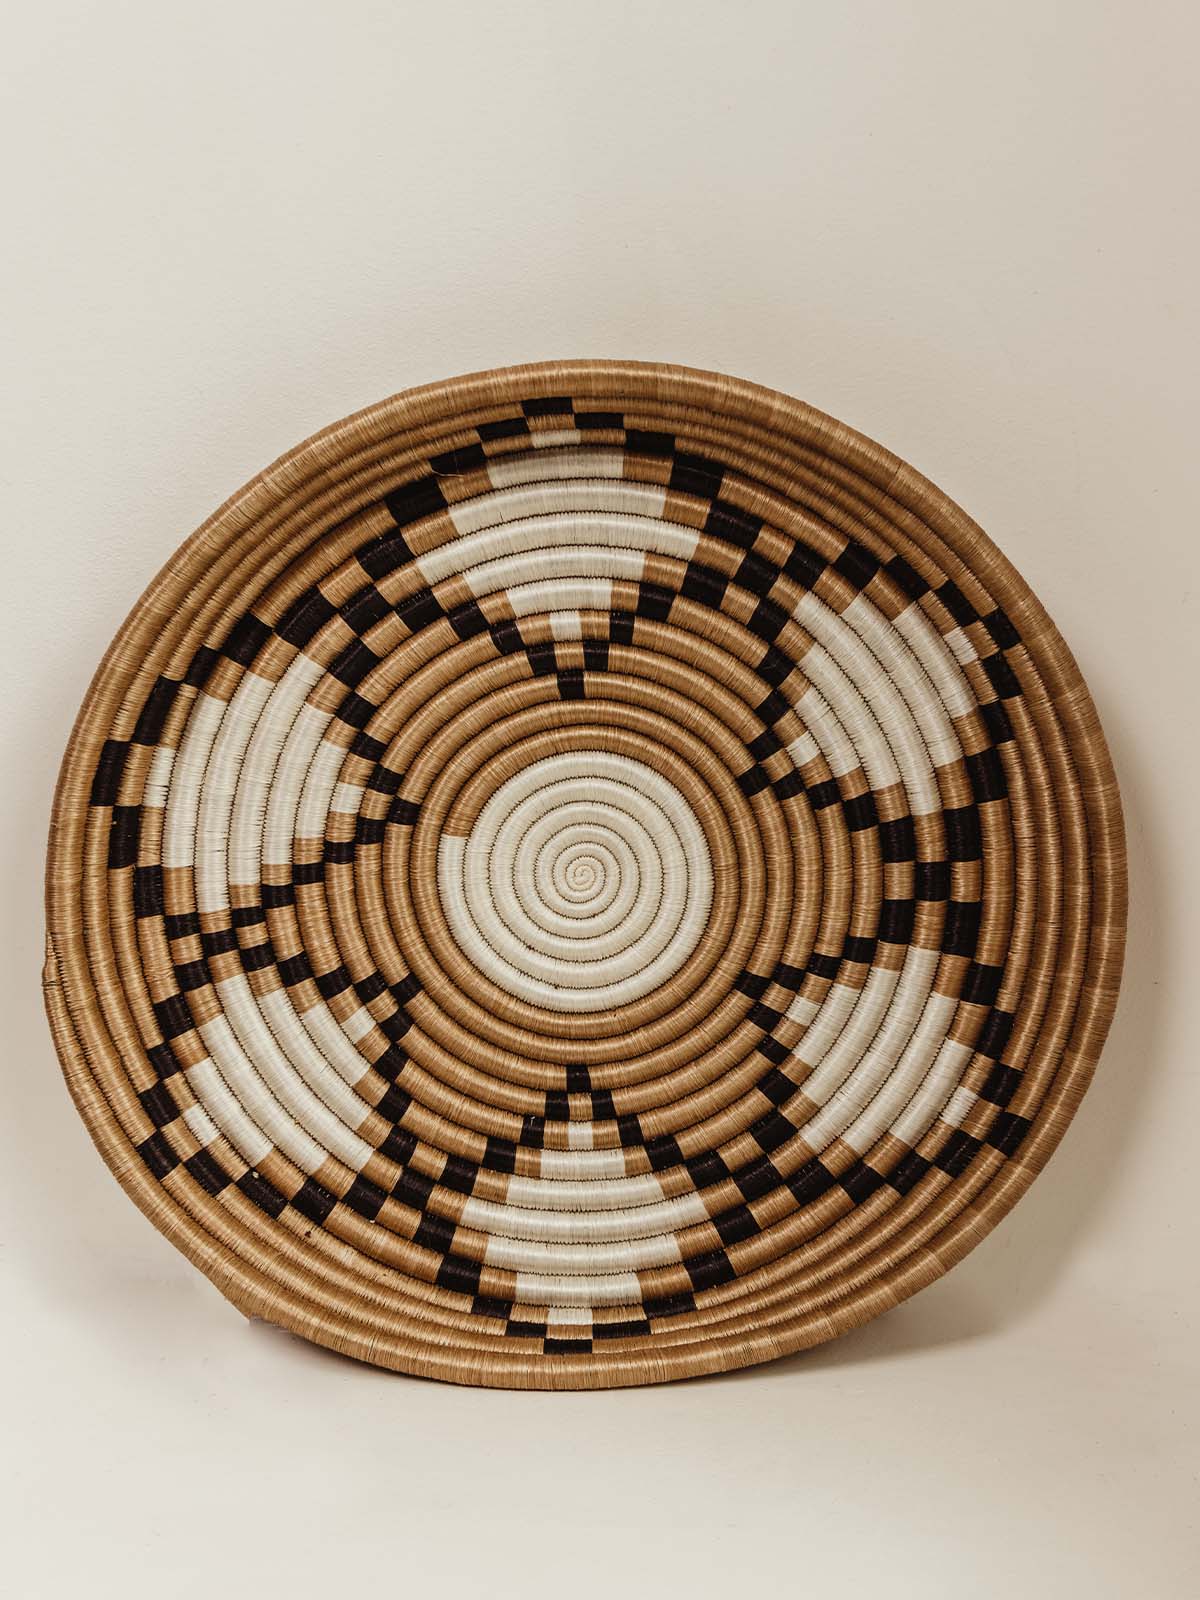 Large shallow woven bowl/tray with black and white detail pattern. Pattern is diamond shaped and floral.